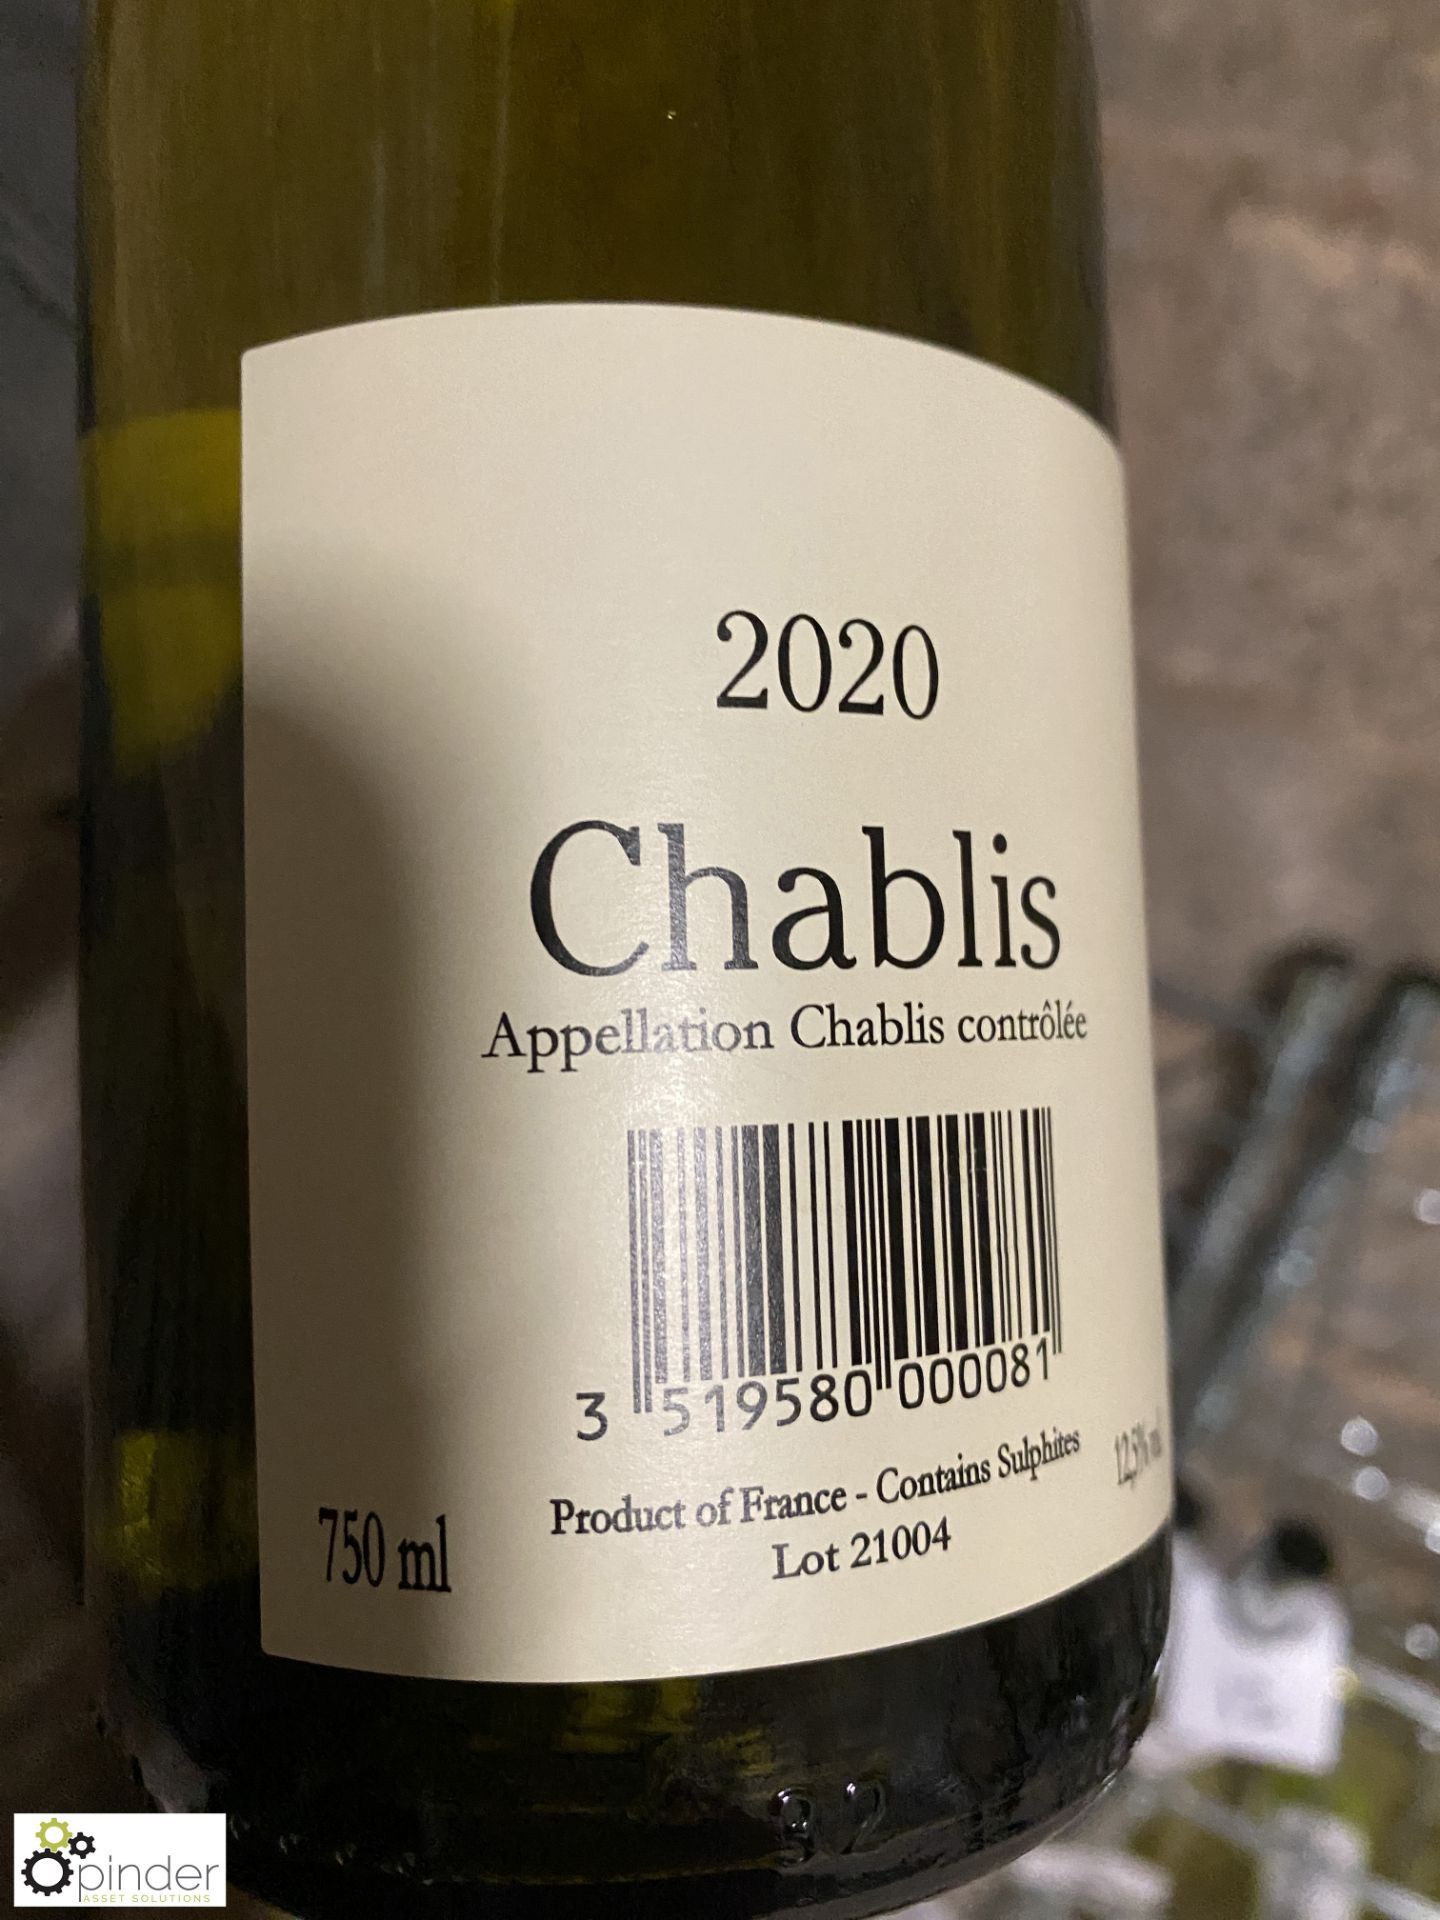 5 bottles Domaine Grand Roche Chablis and 10 bottles Domaine Jean Goolley and Fils Chablis Premier - Image 3 of 6